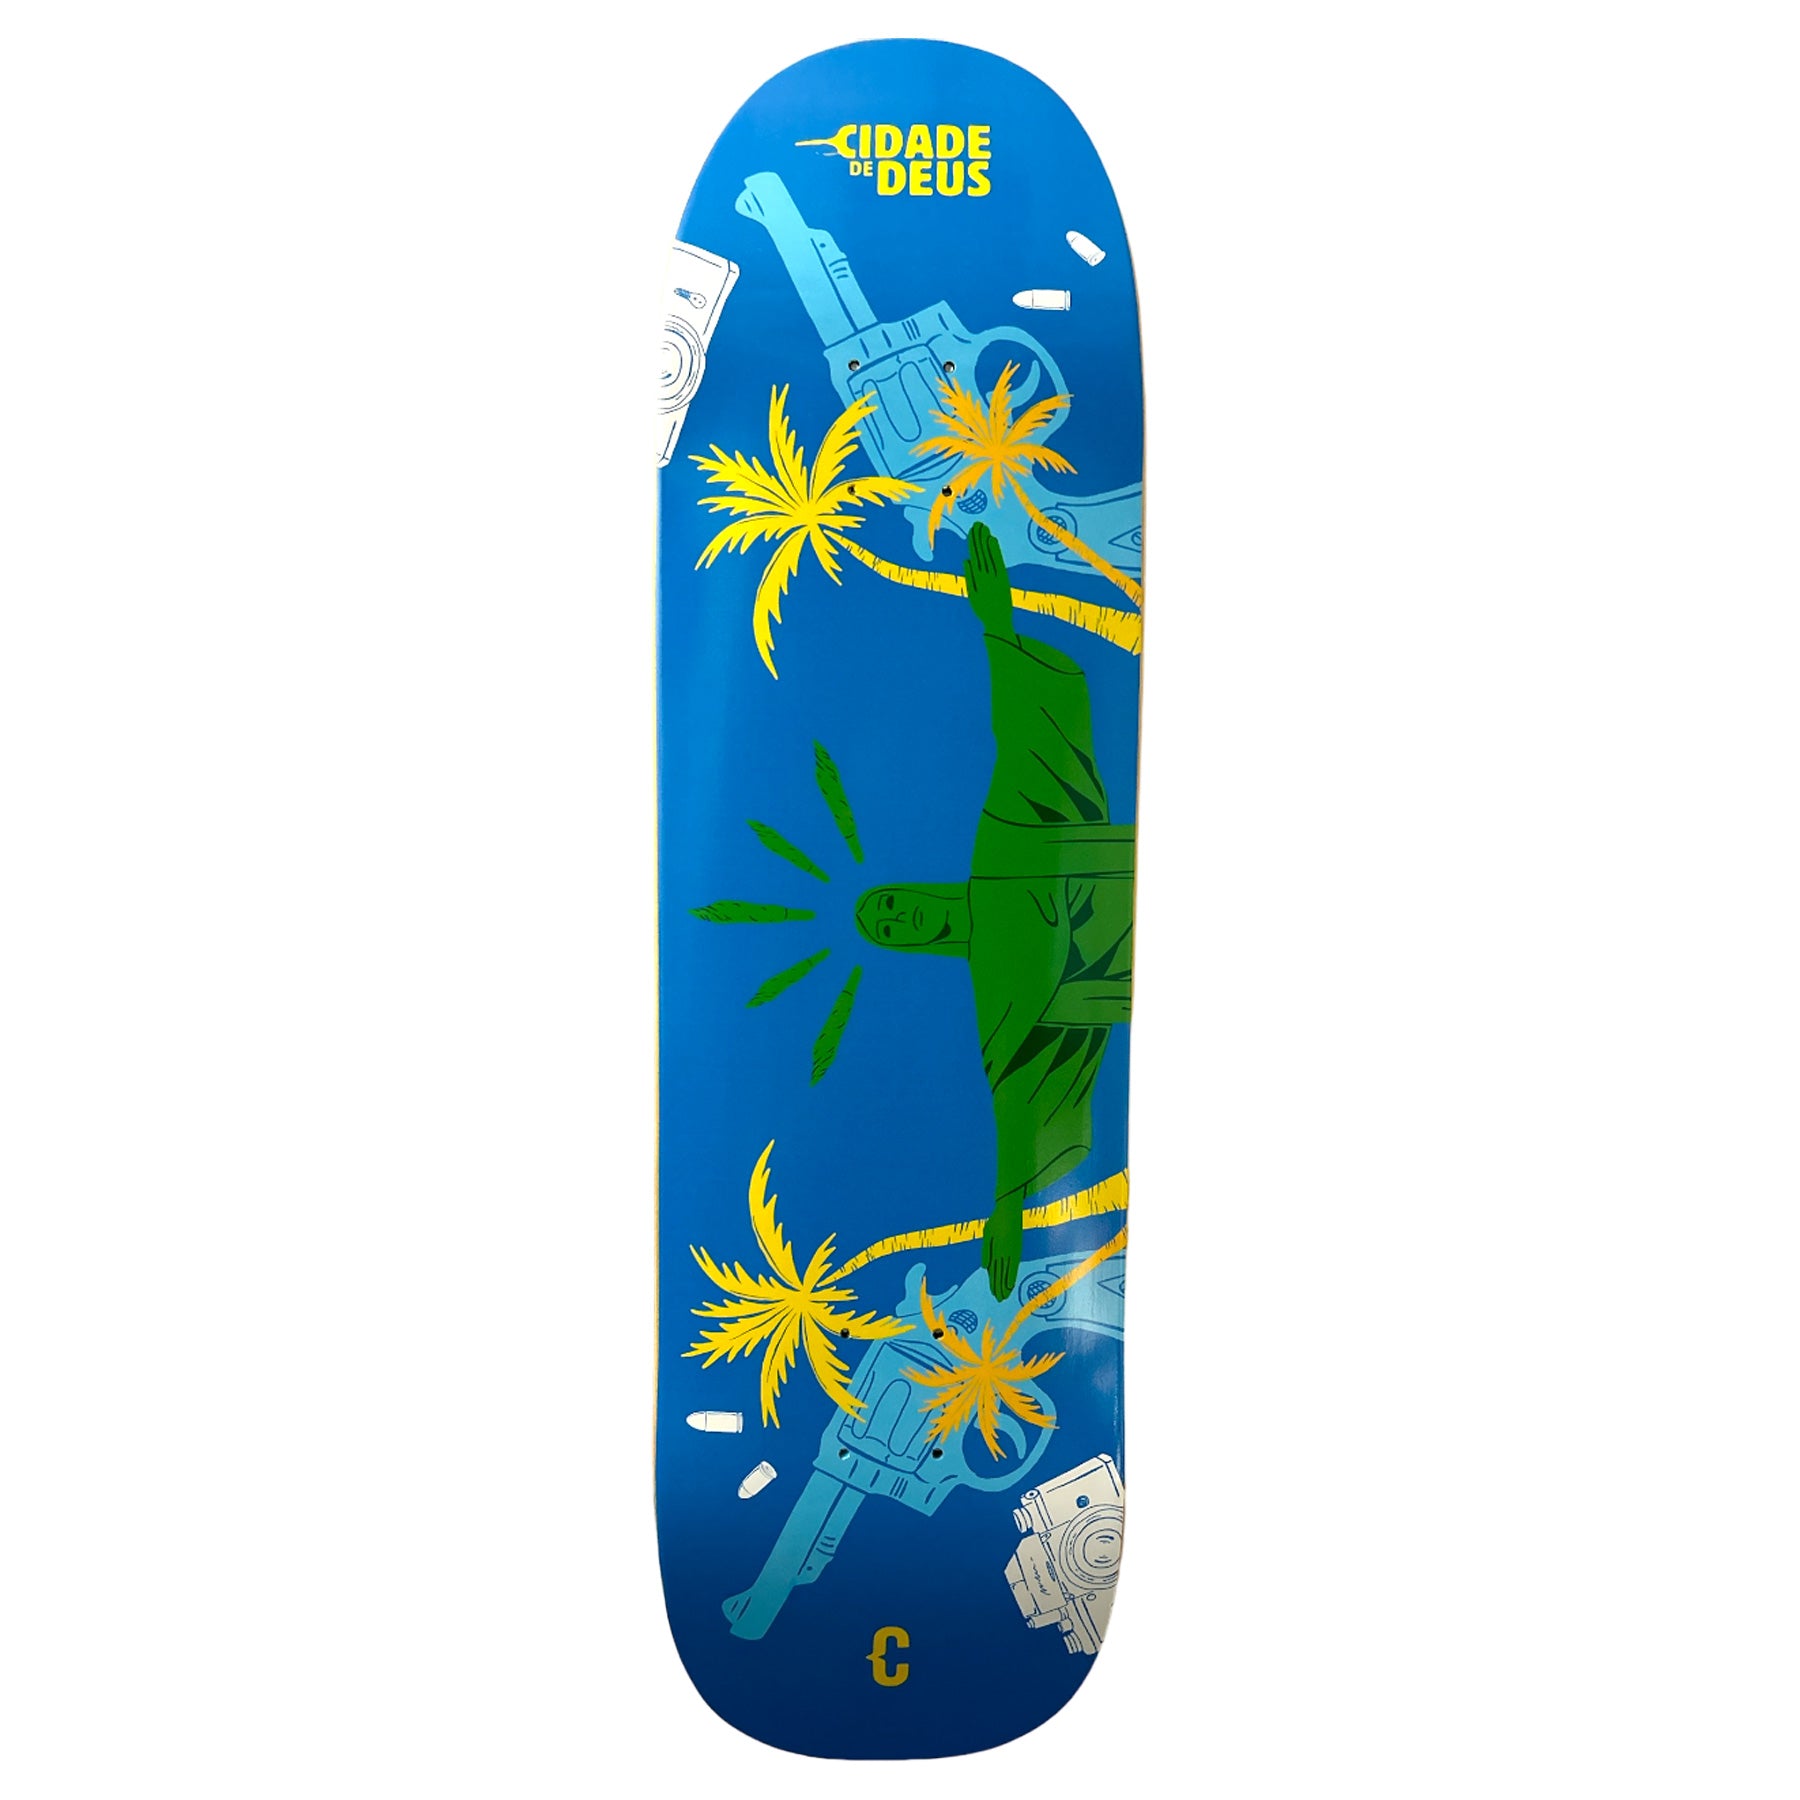 Clown skateboards allcity deck in blue with a city of god film inspired graphic. Free uk shipping over £50